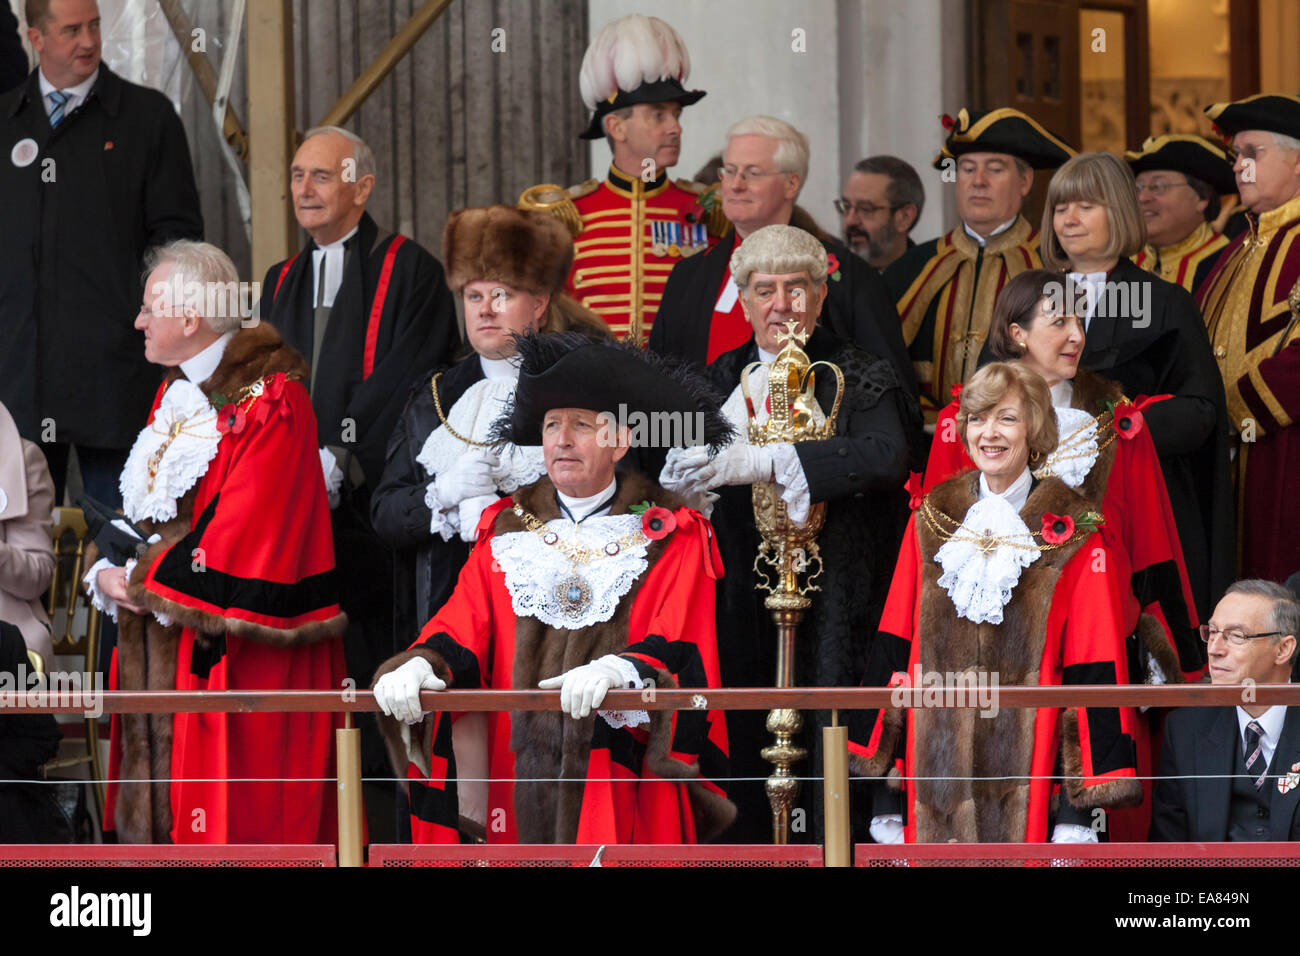 8th November 2014, Lord Mayor's Show, City of London, London, UK. The new 687th Lord Mayor, Alan Yarrow (front middle), watches the procession from Mansion House balcony. The outgoing mayor, Fiona Woolf, CBE stands to his right. The Lord Mayor's Show is the oldest civil procession in the world, it celebrates the start of a one-year term for the new Mayor of the City of London. Stock Photo